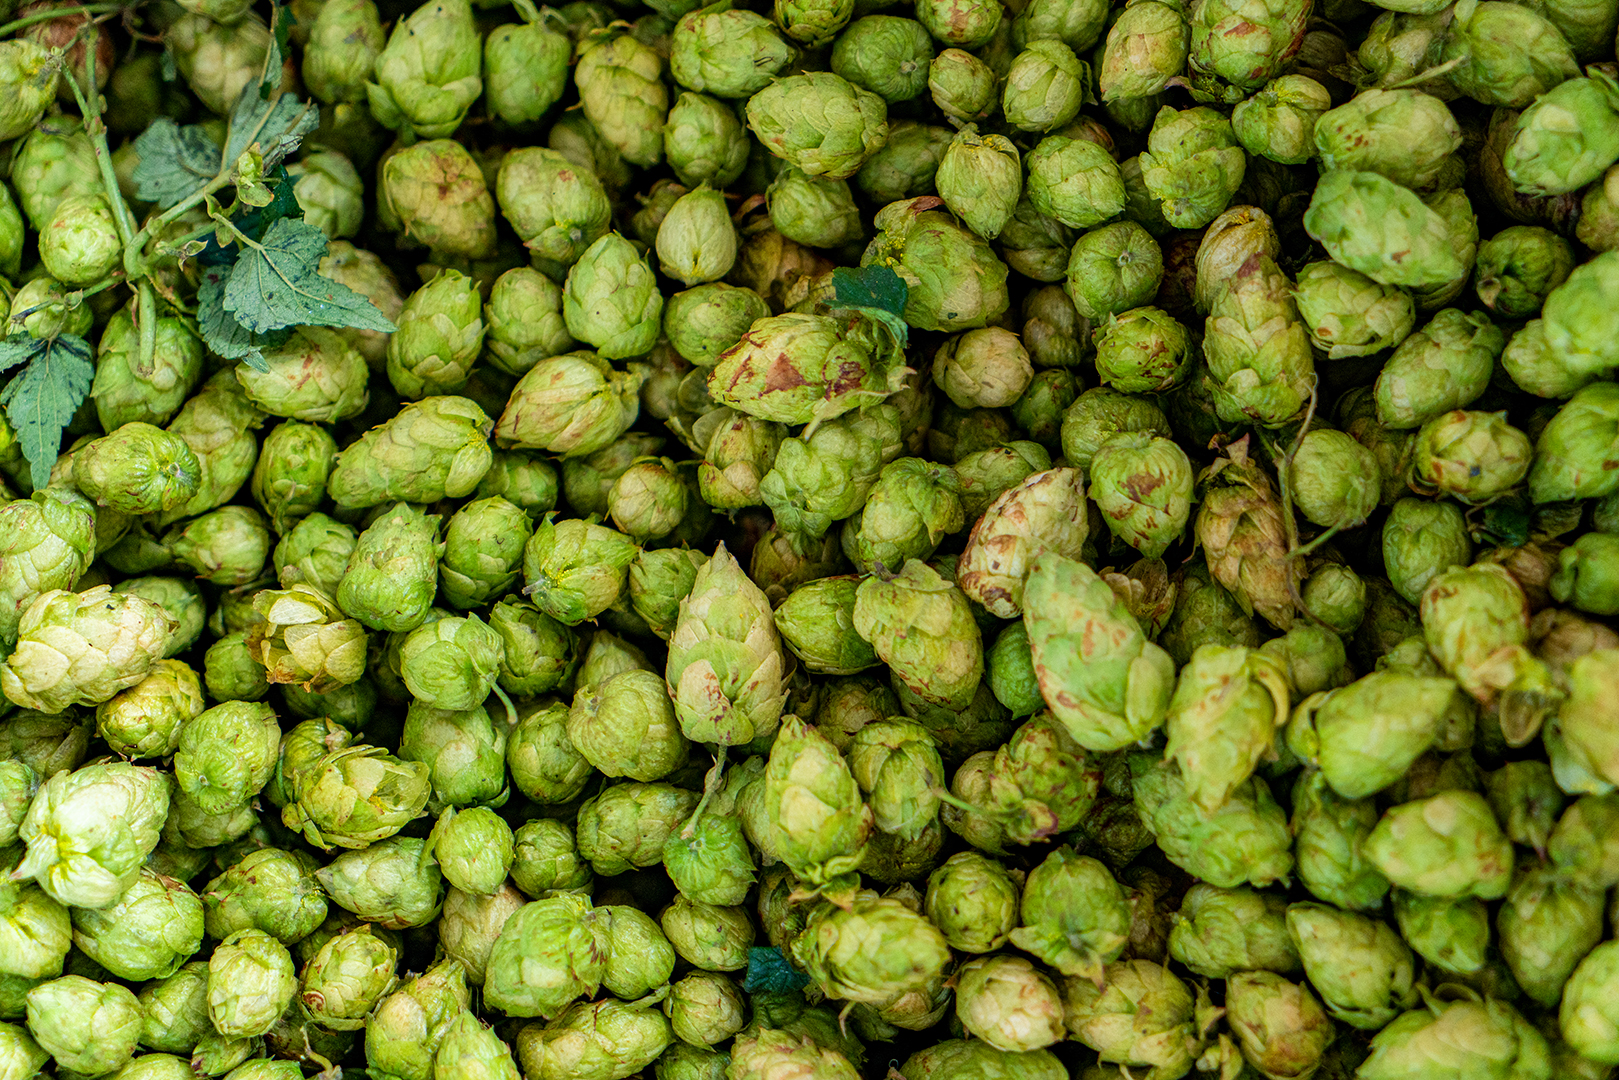 The merits of double dry-hopping